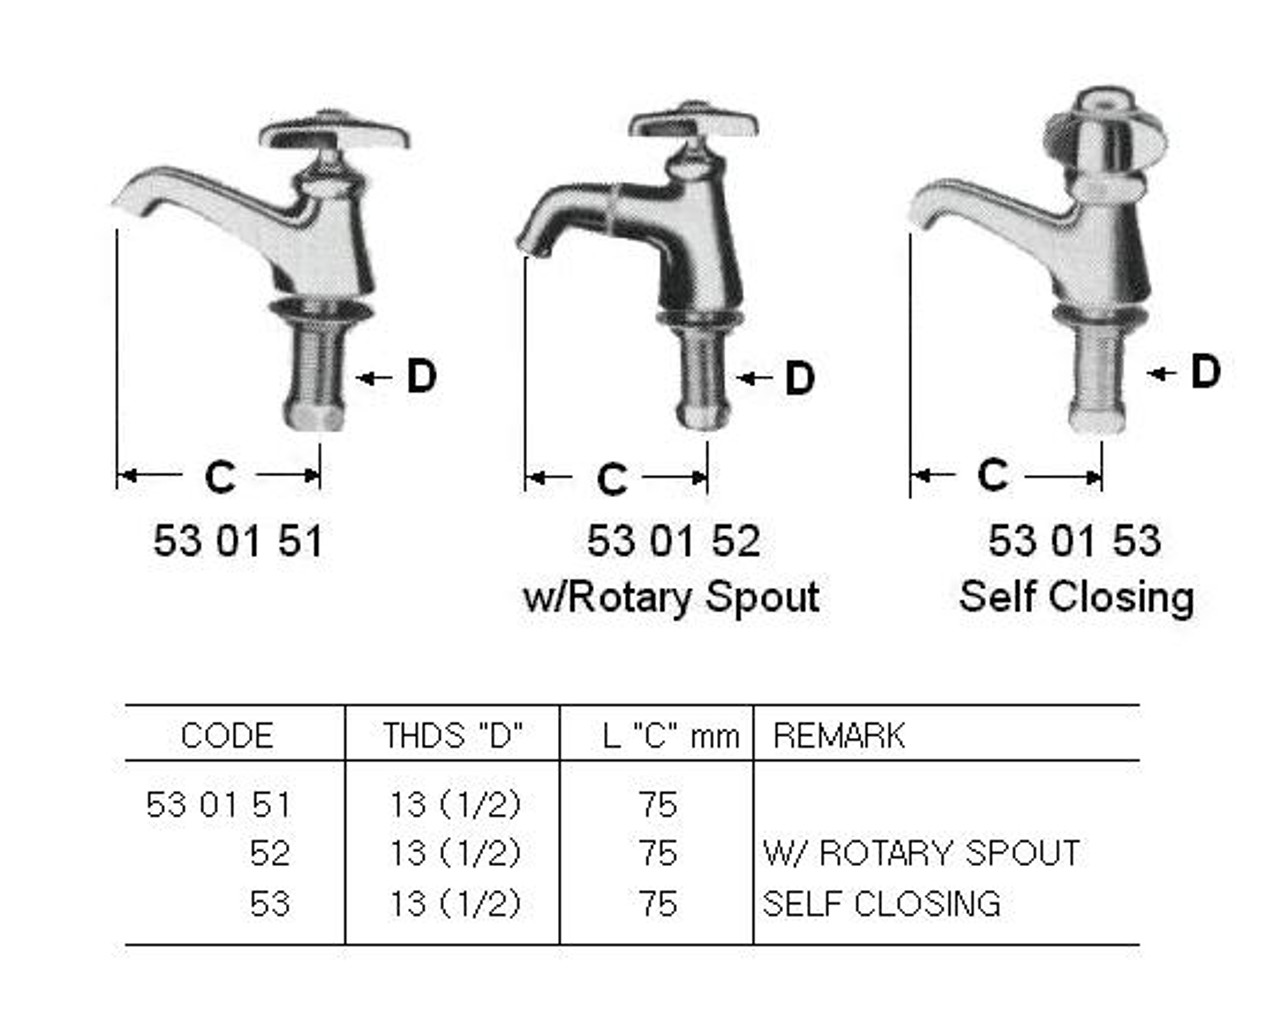 IMPA 530151 LAVATORY FAUCET CHROMED WATERLINE 1/2" COLD